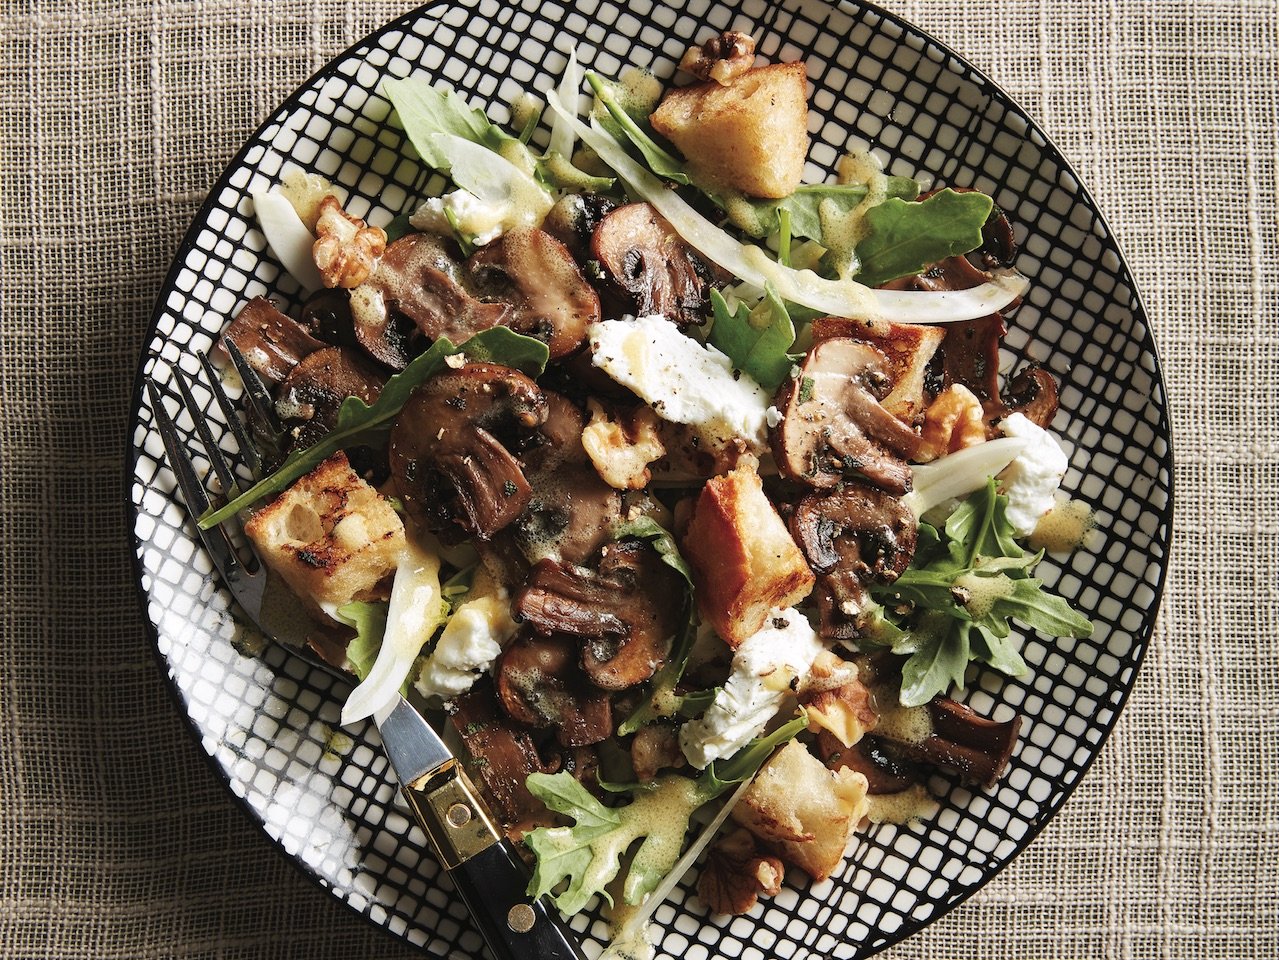 Mushroom salad with fennel and goat cheese